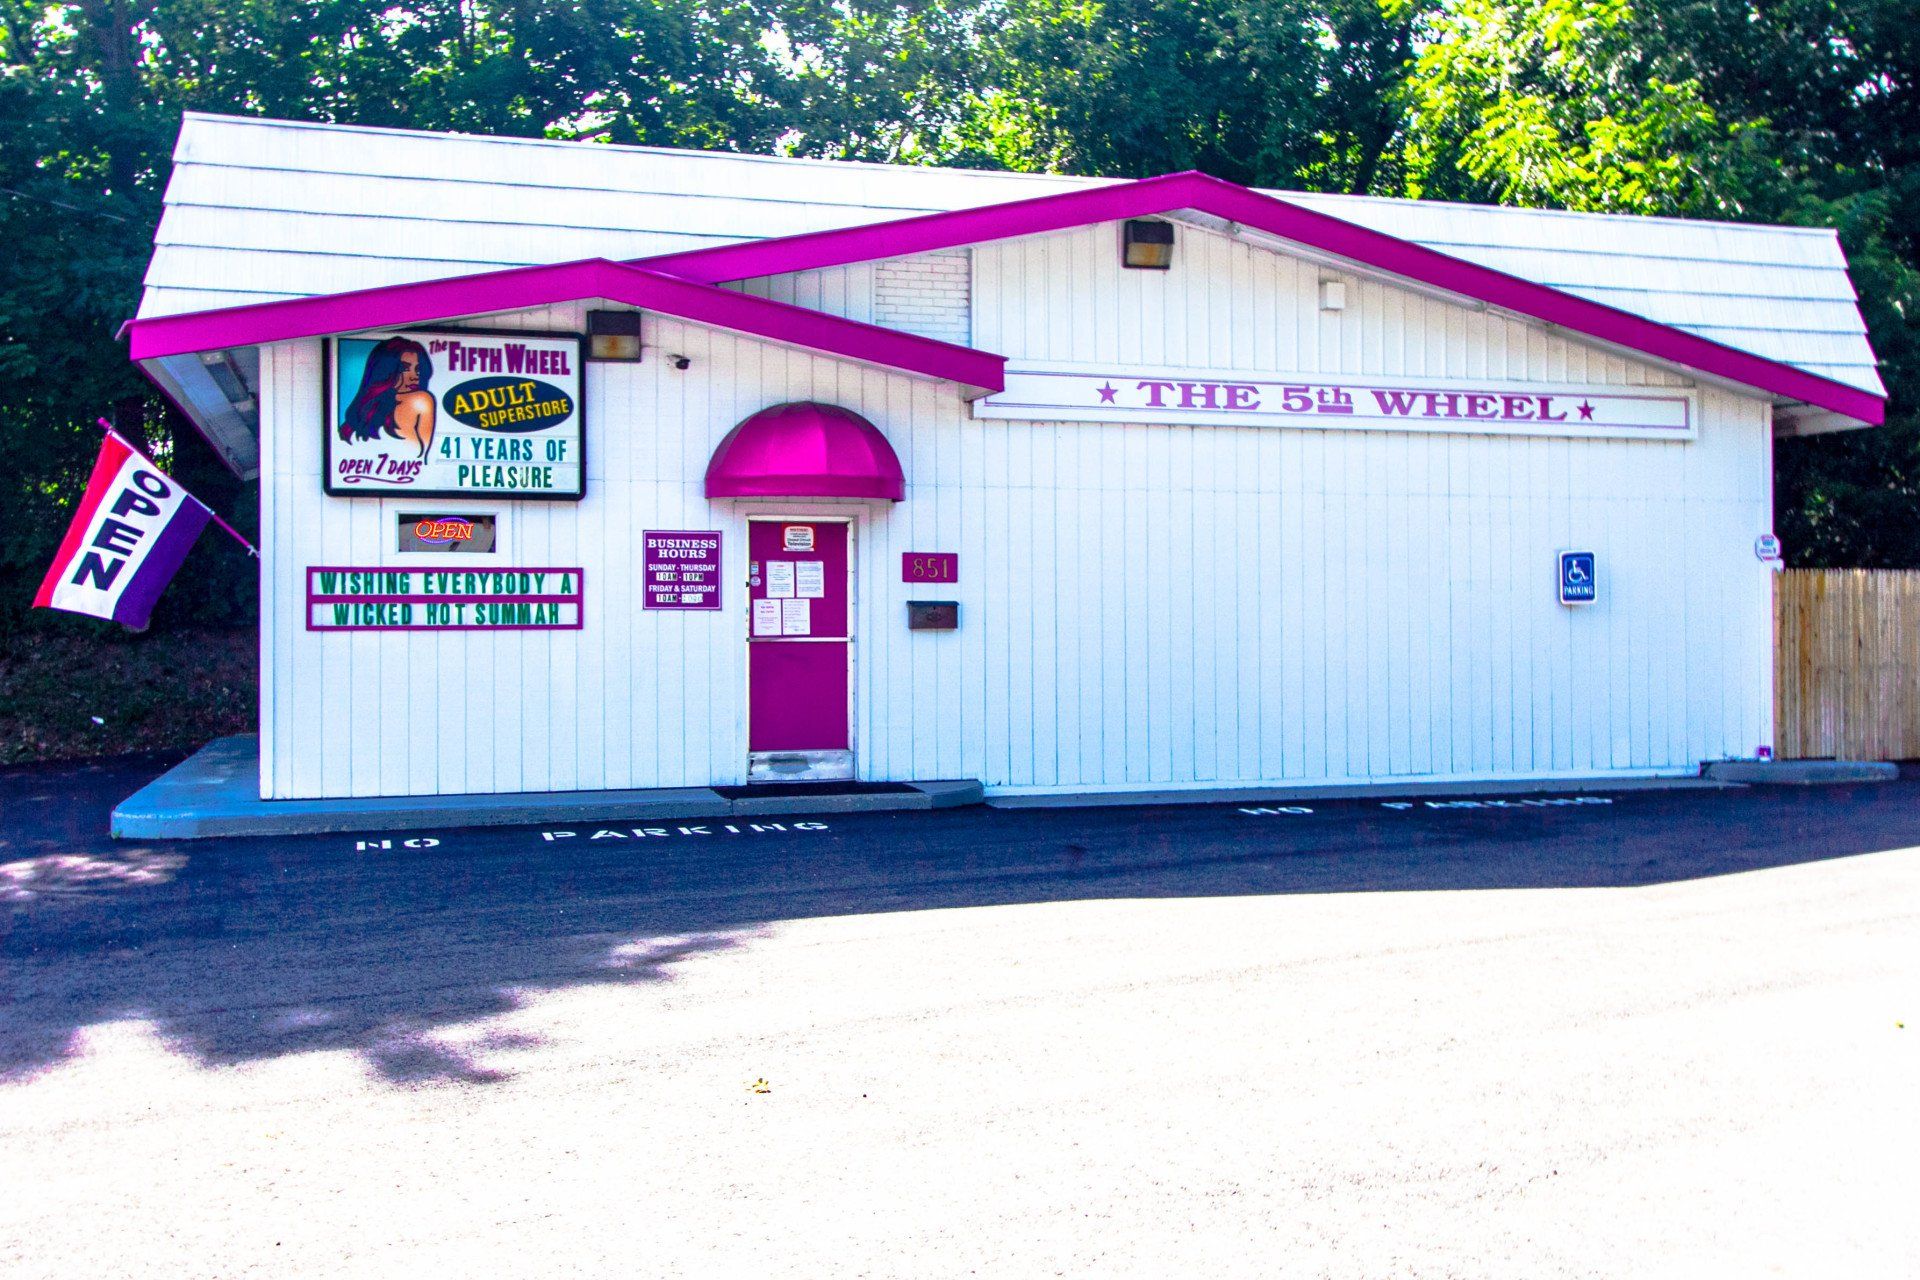 The Fifth Wheel Adult Superstore building